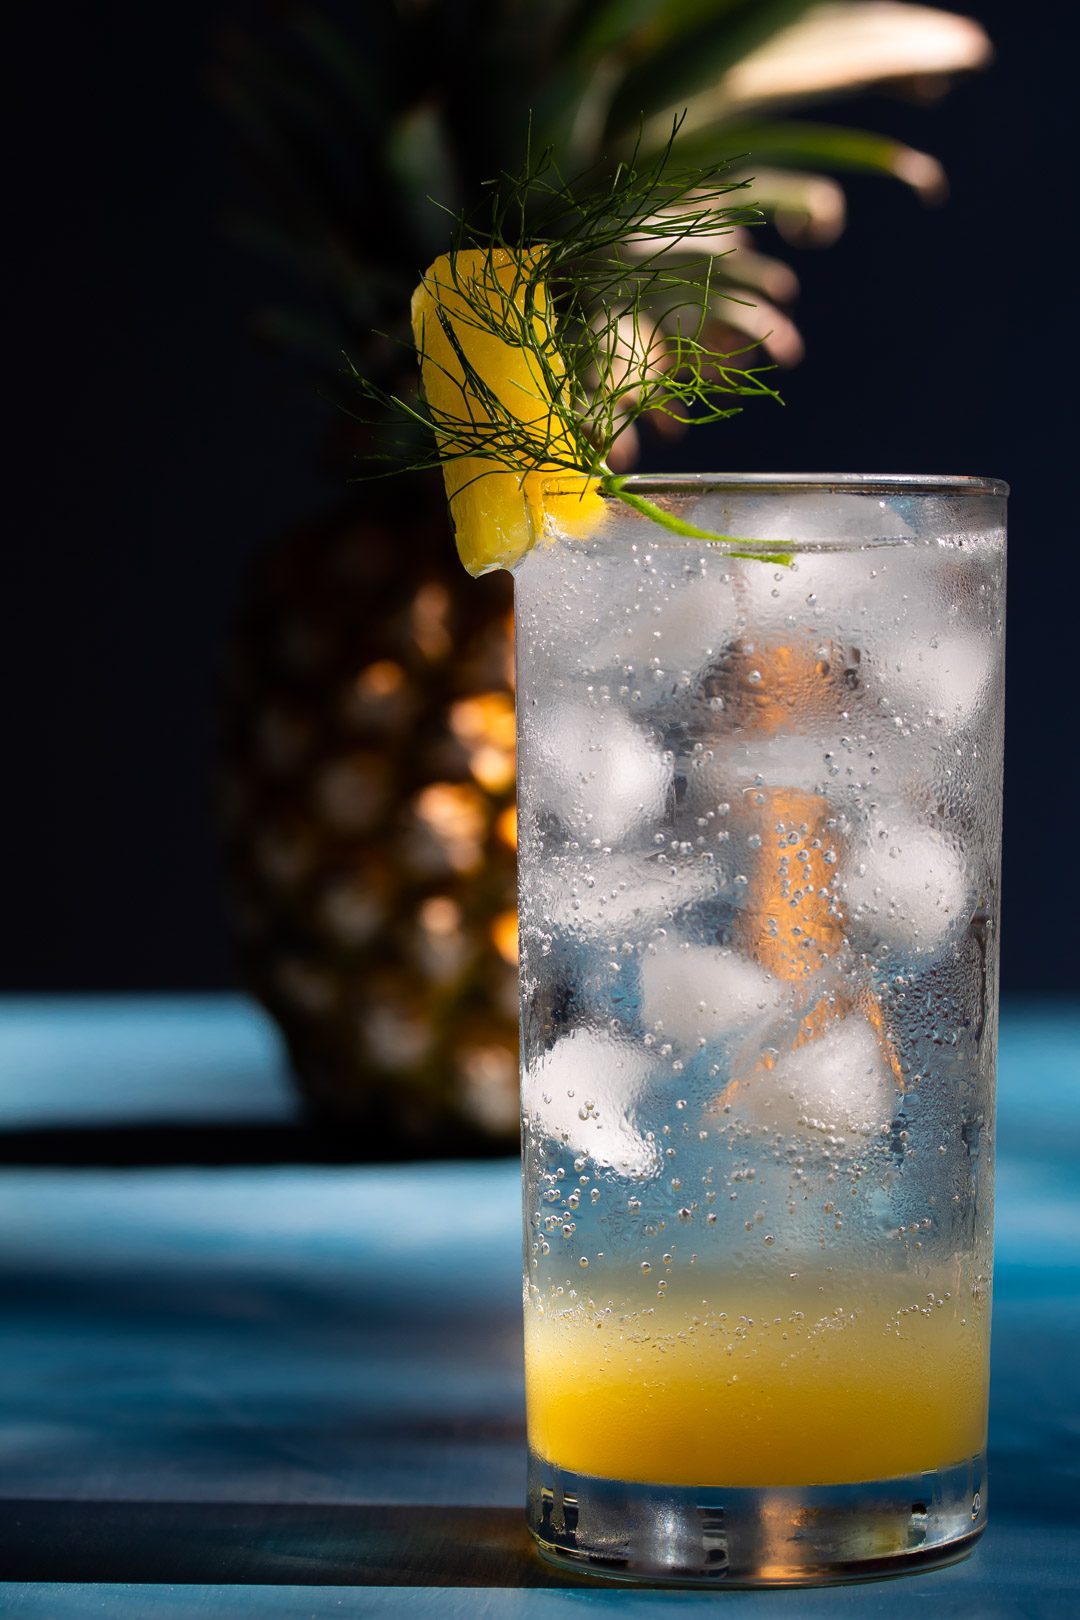 pineapple fennel shrub syrup with pineapple in background